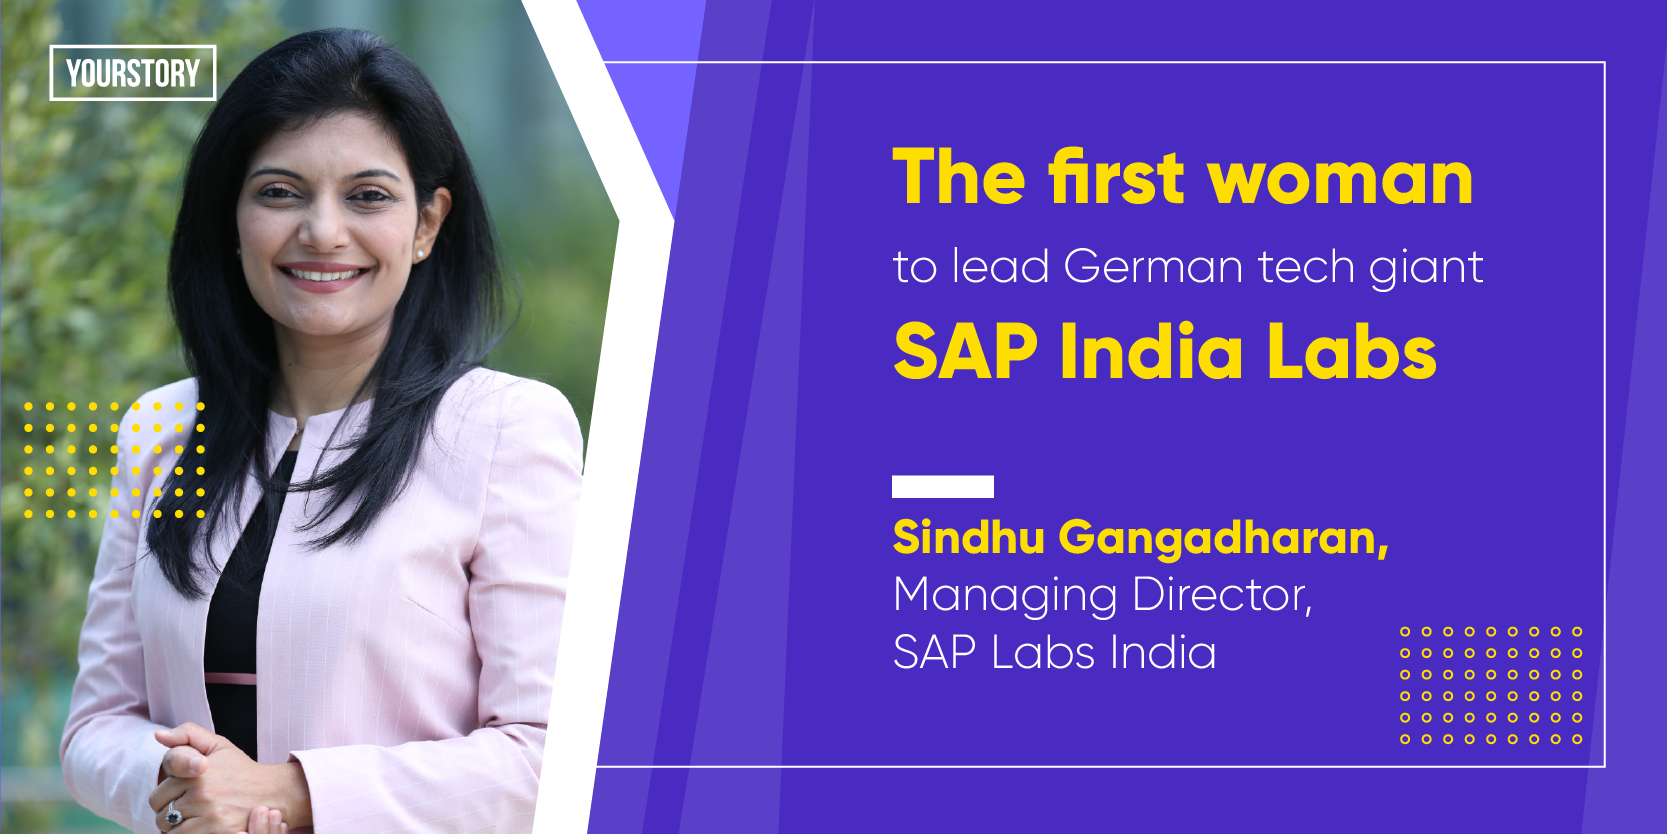 Sindhu Gangadharan of SAP Labs India on people-centric innovations, being a woman in tech, and more